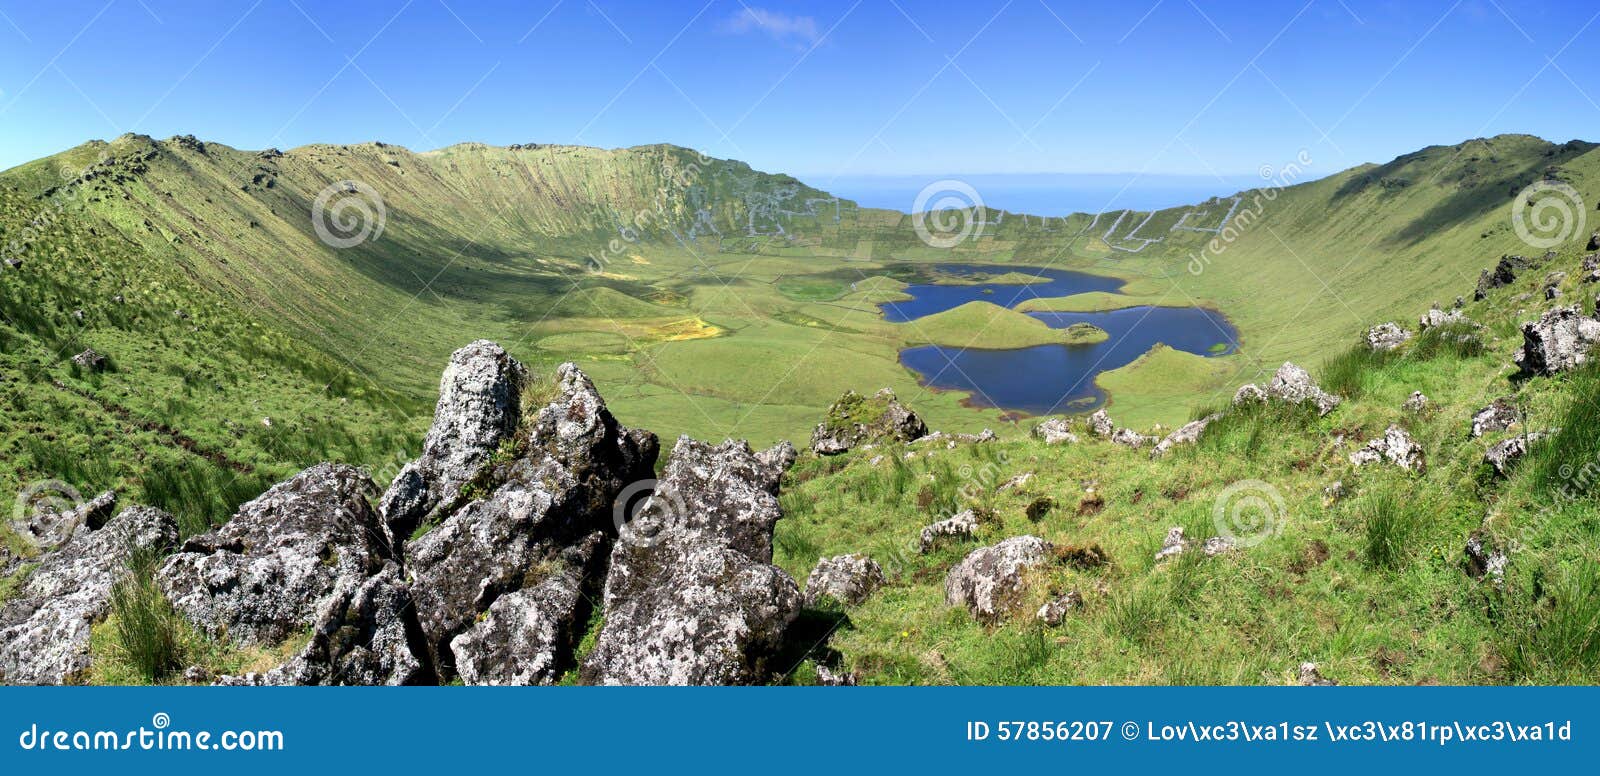 volcano crater on the island of corvo azores portugal